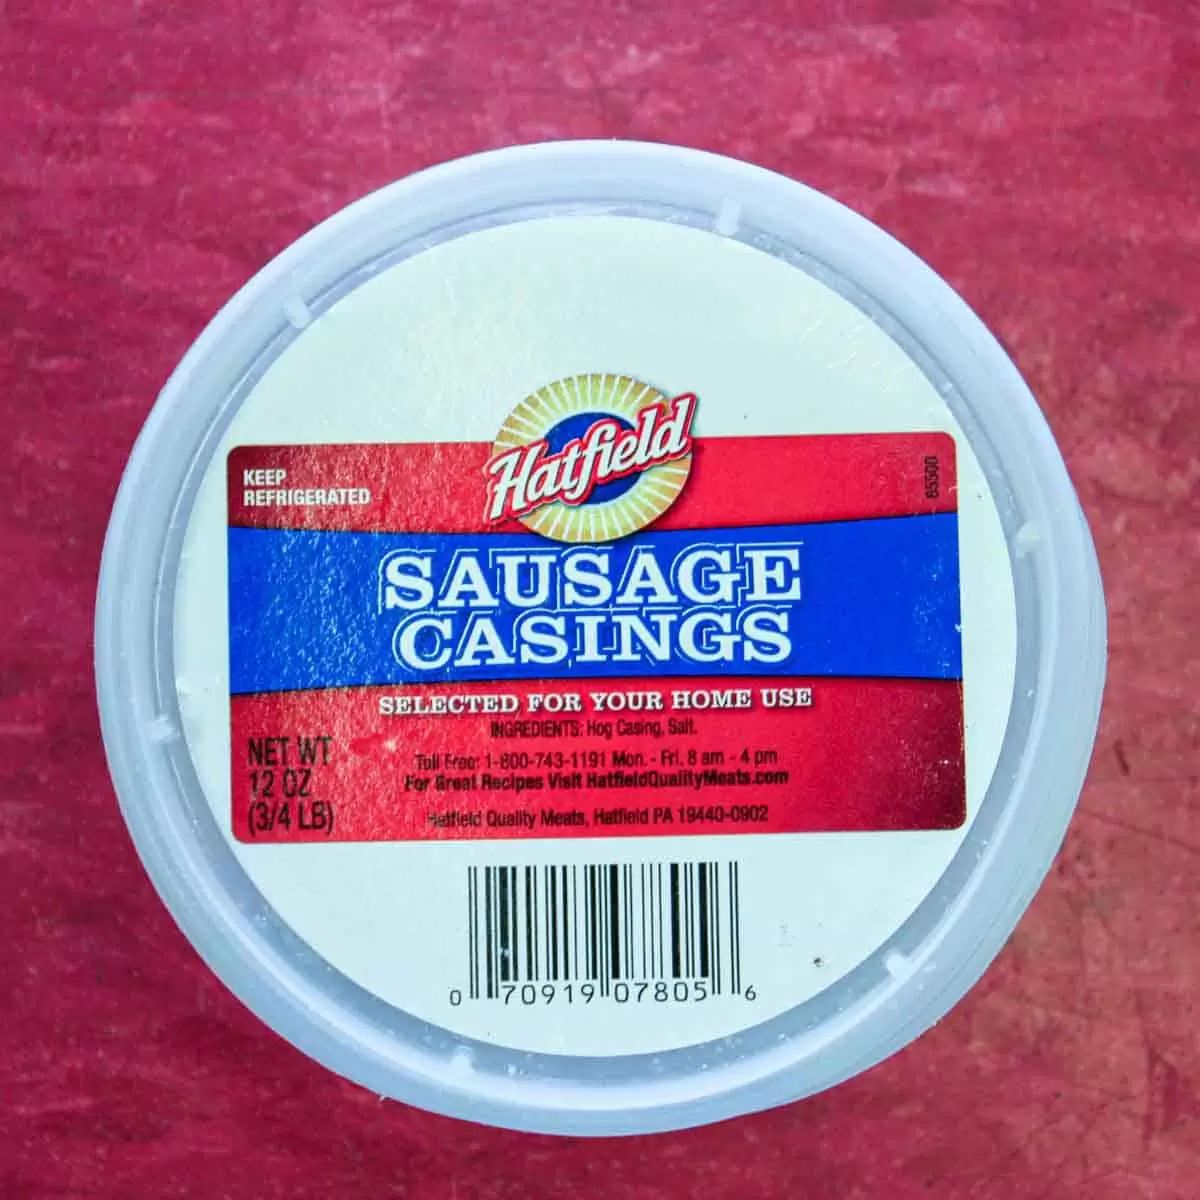 A container of sausage casings on a red surface to make Portuguese sausage